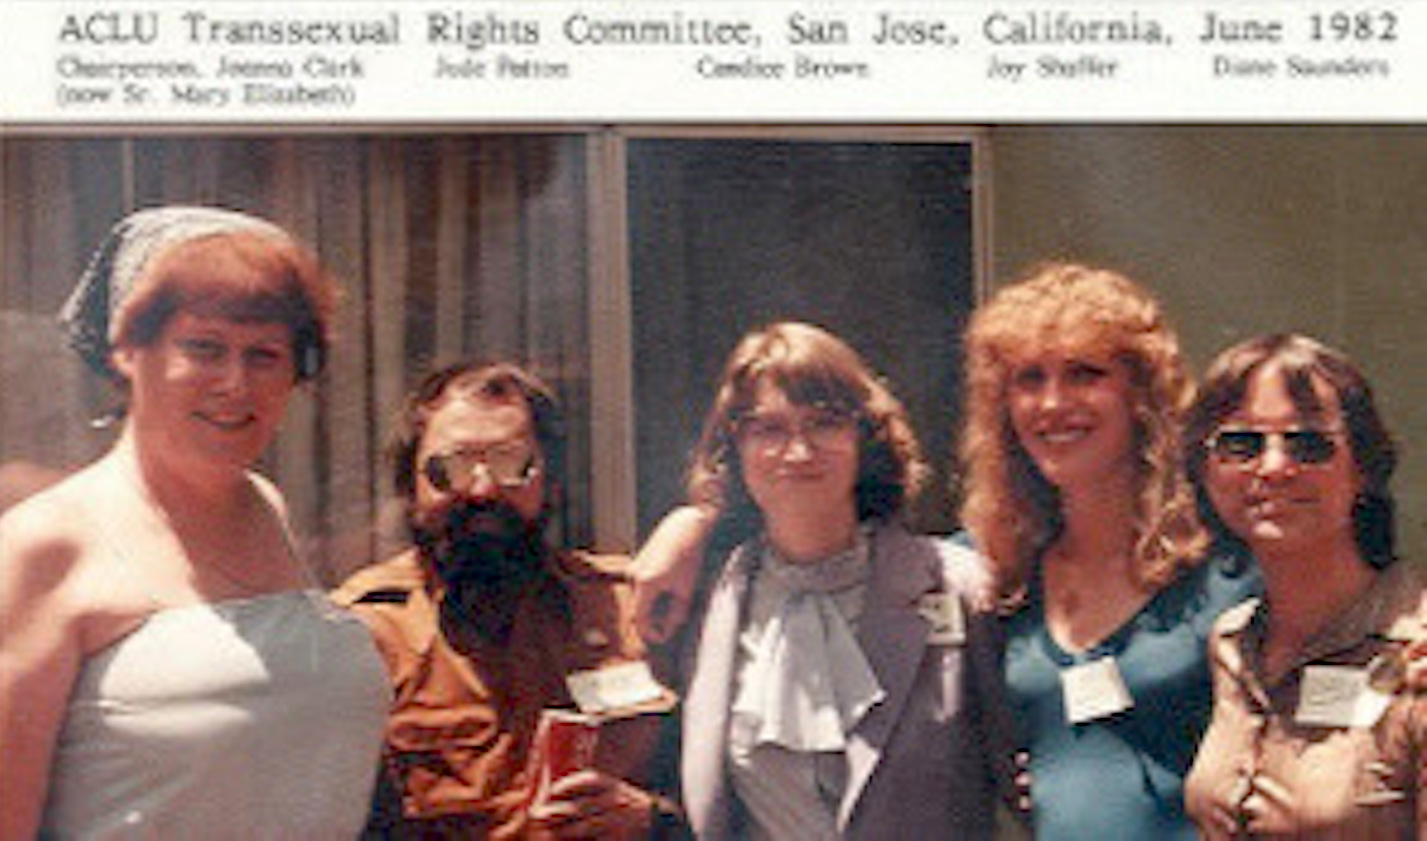 Jude Patton participating in the ACLU Transsexual Rights Committee,1982. Photo courtesy of Jude Patton.